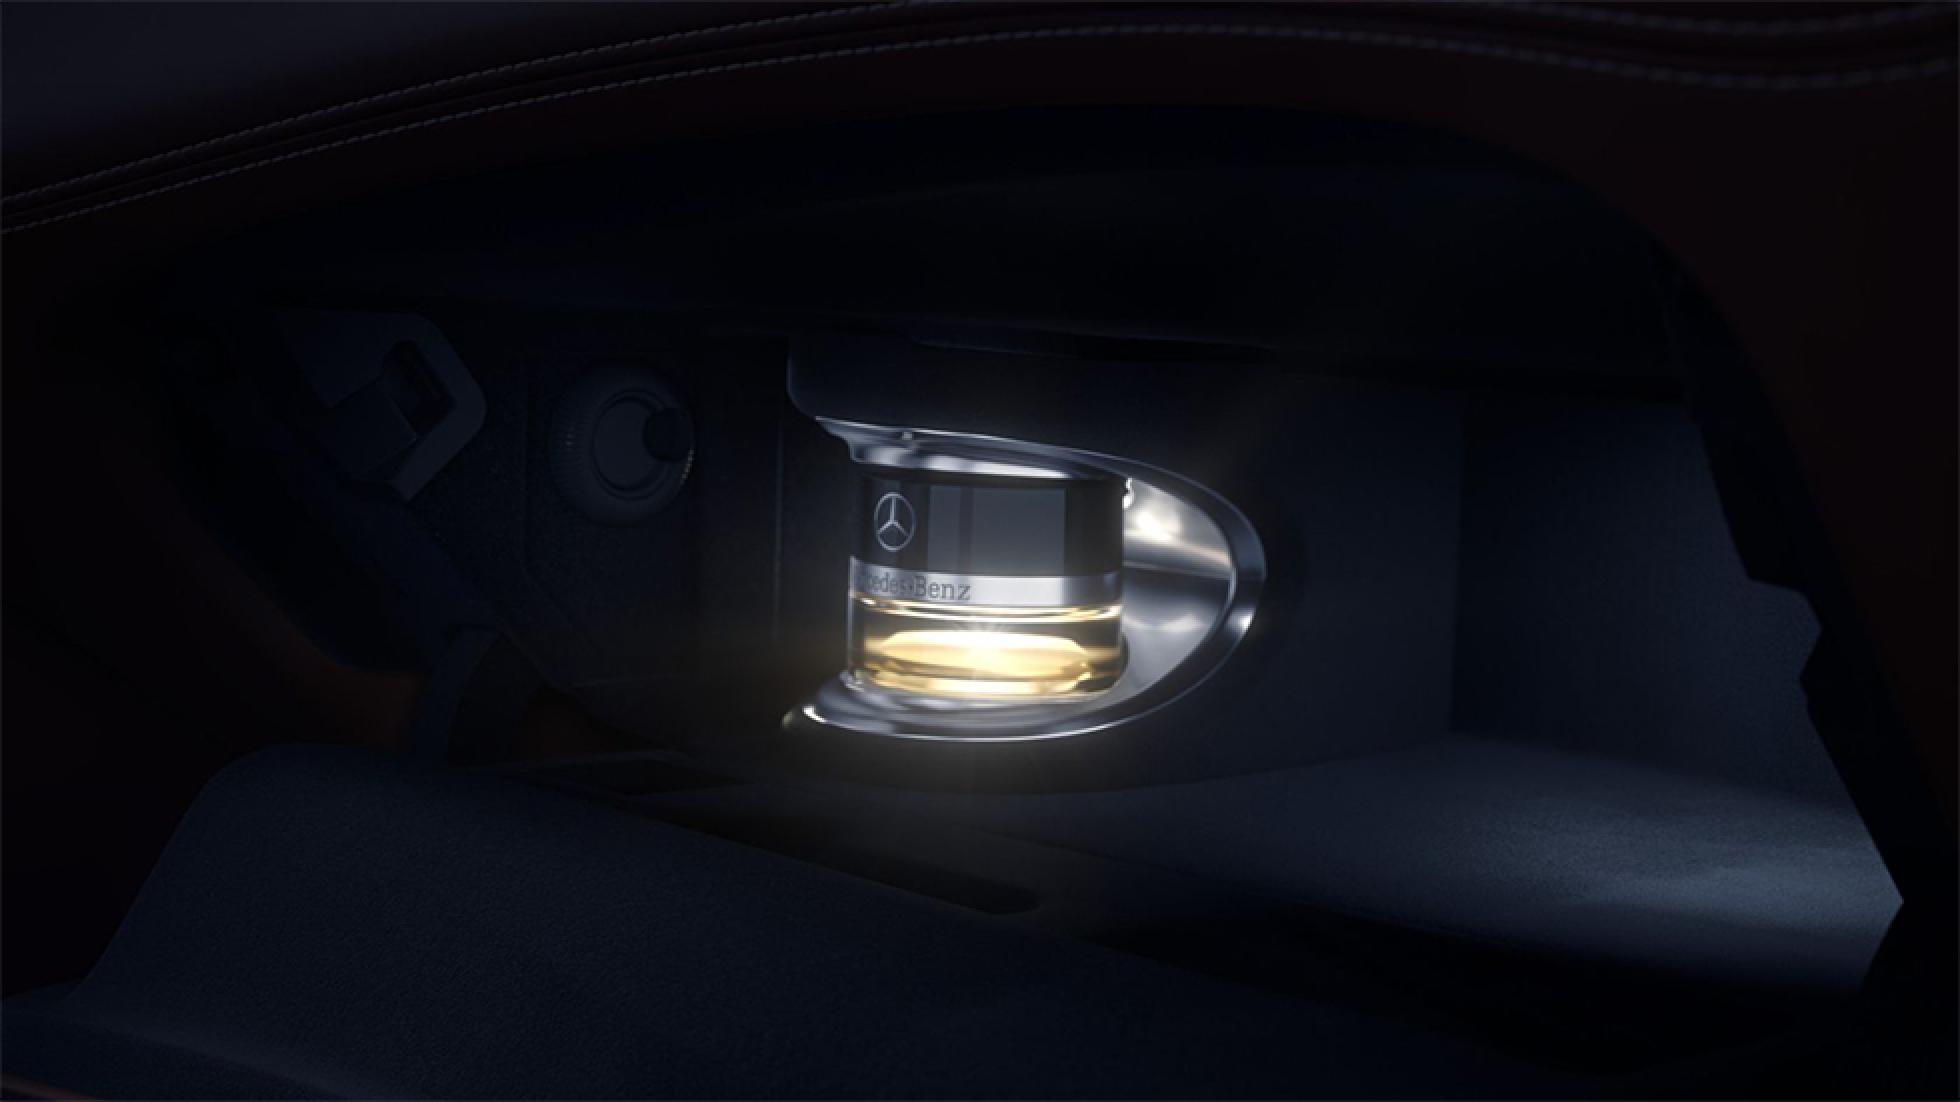 9. Mercedes S Class – Scent system